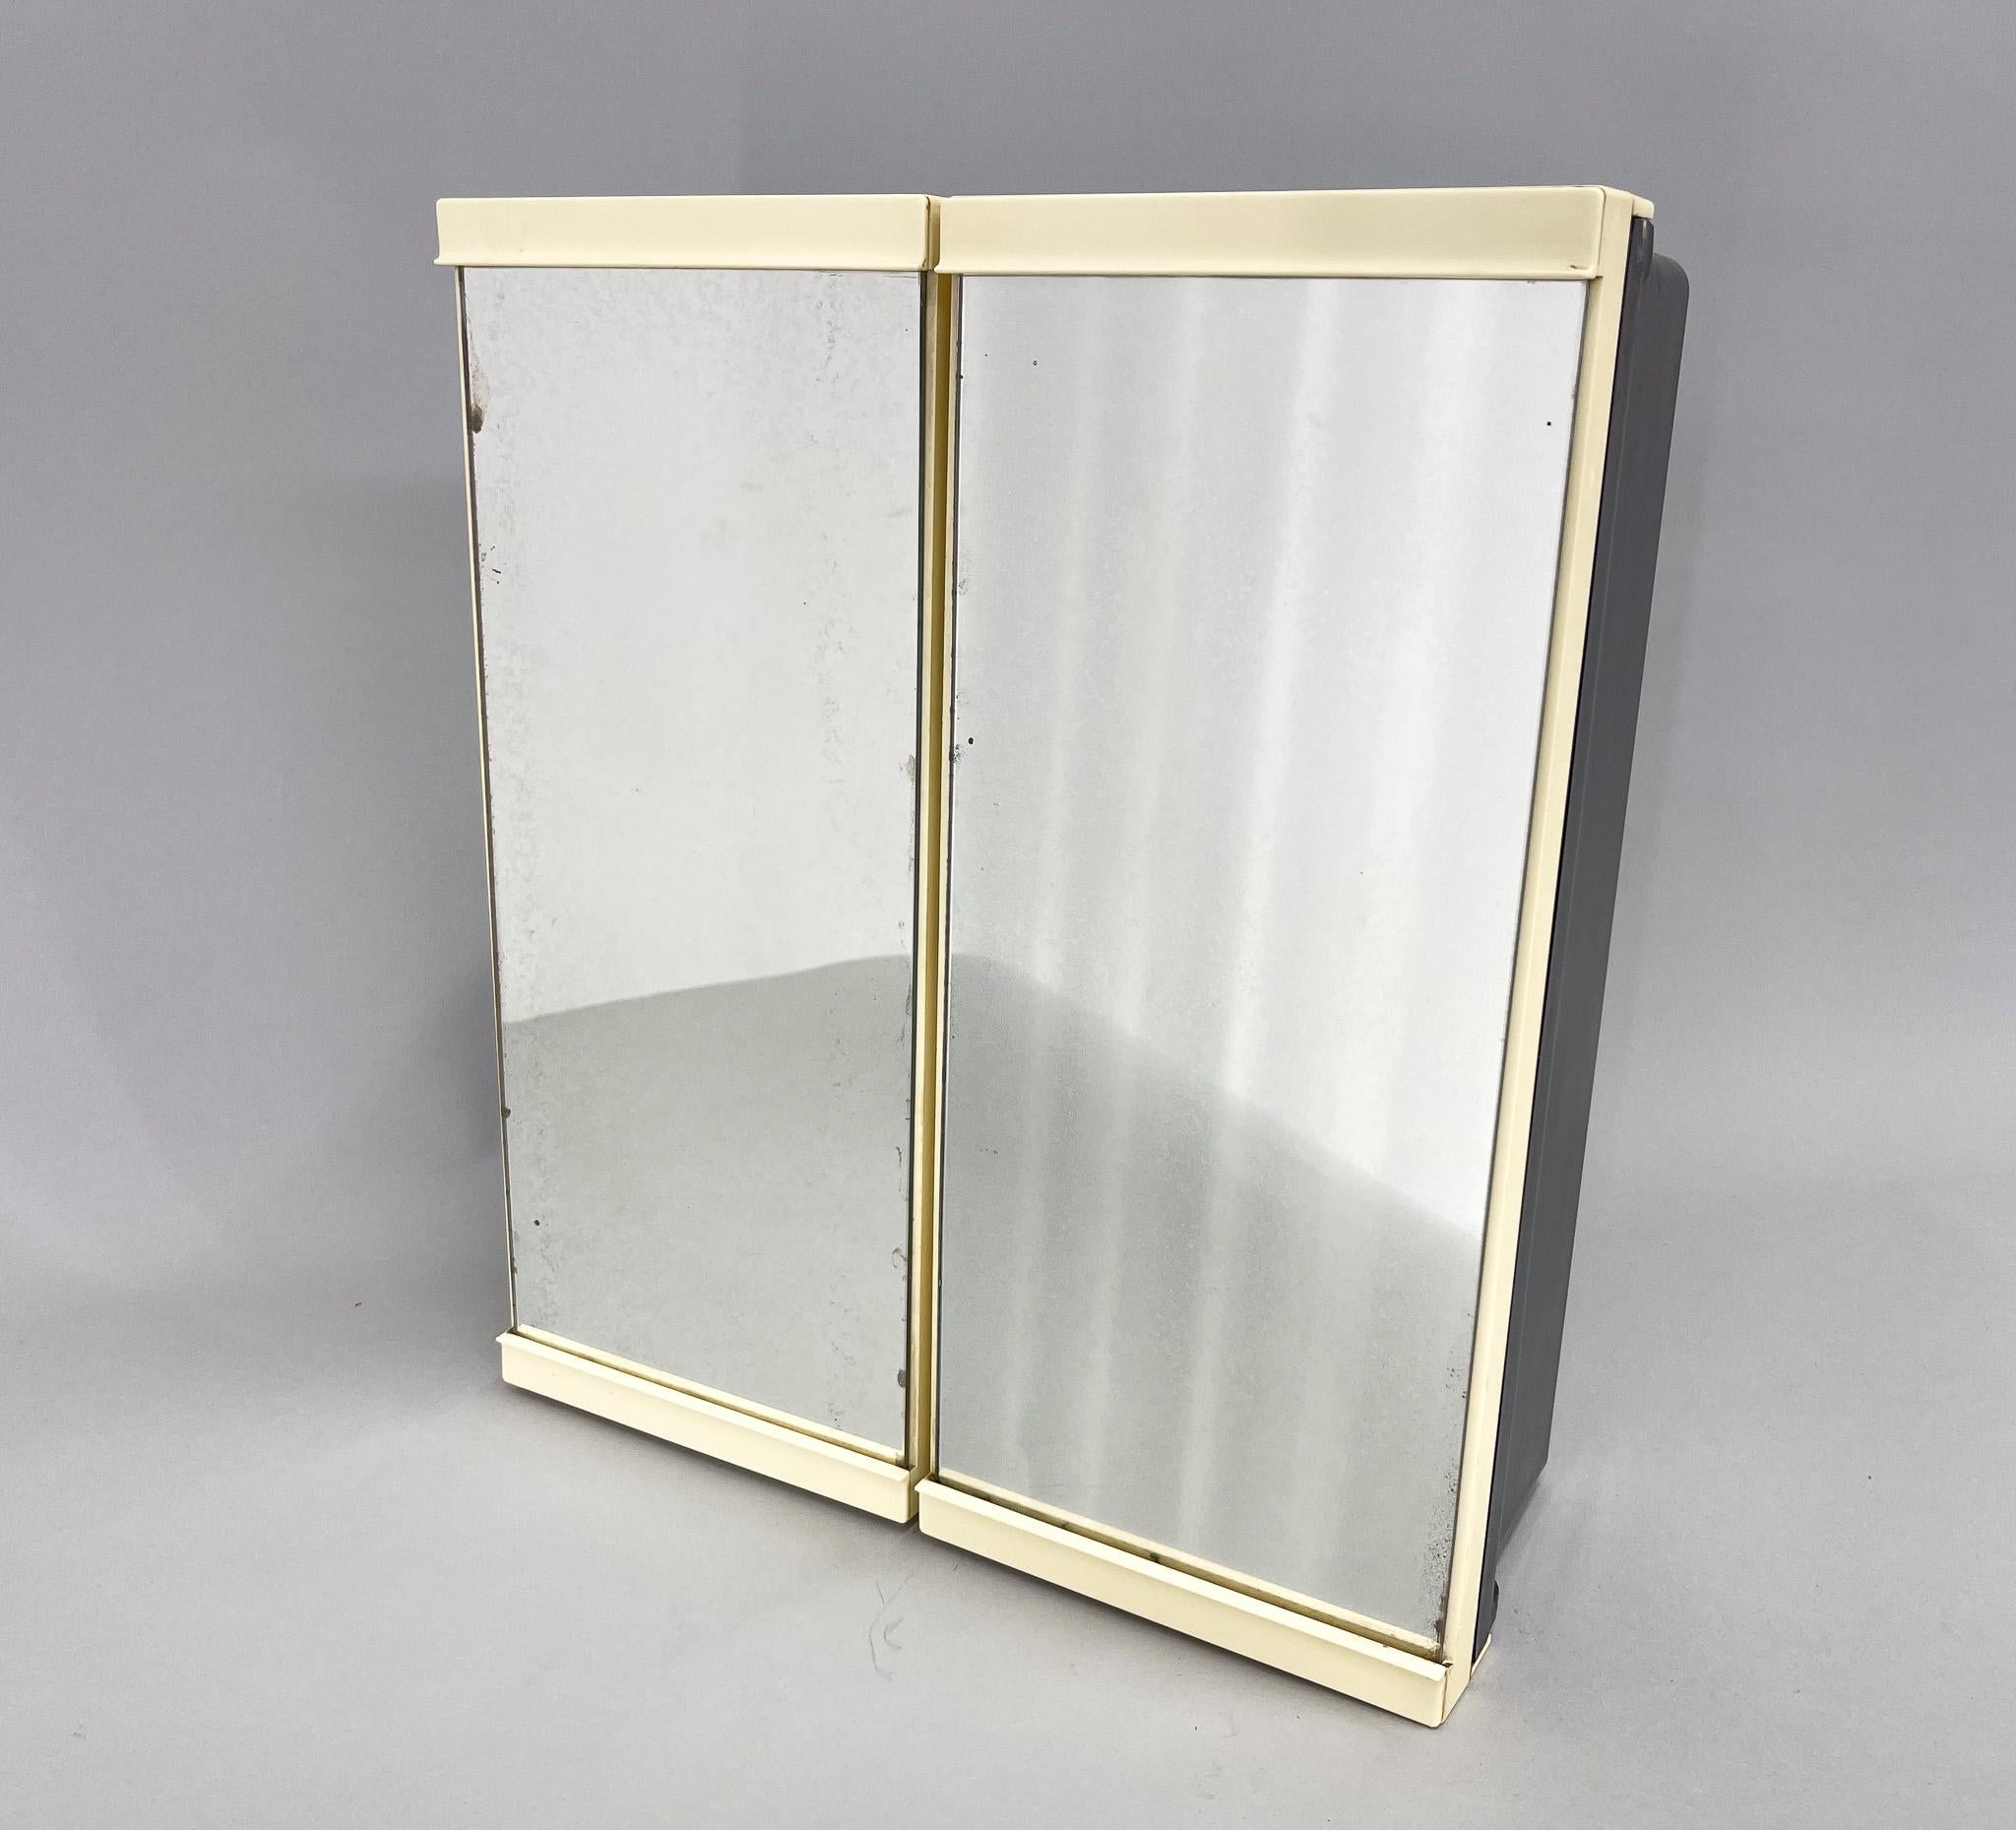 A popular 1960s cabinet with mirrored doors and shelves inside. Usually used in bathrooms. Made of plastic in black and cream colour. The mirror bears signs of time.